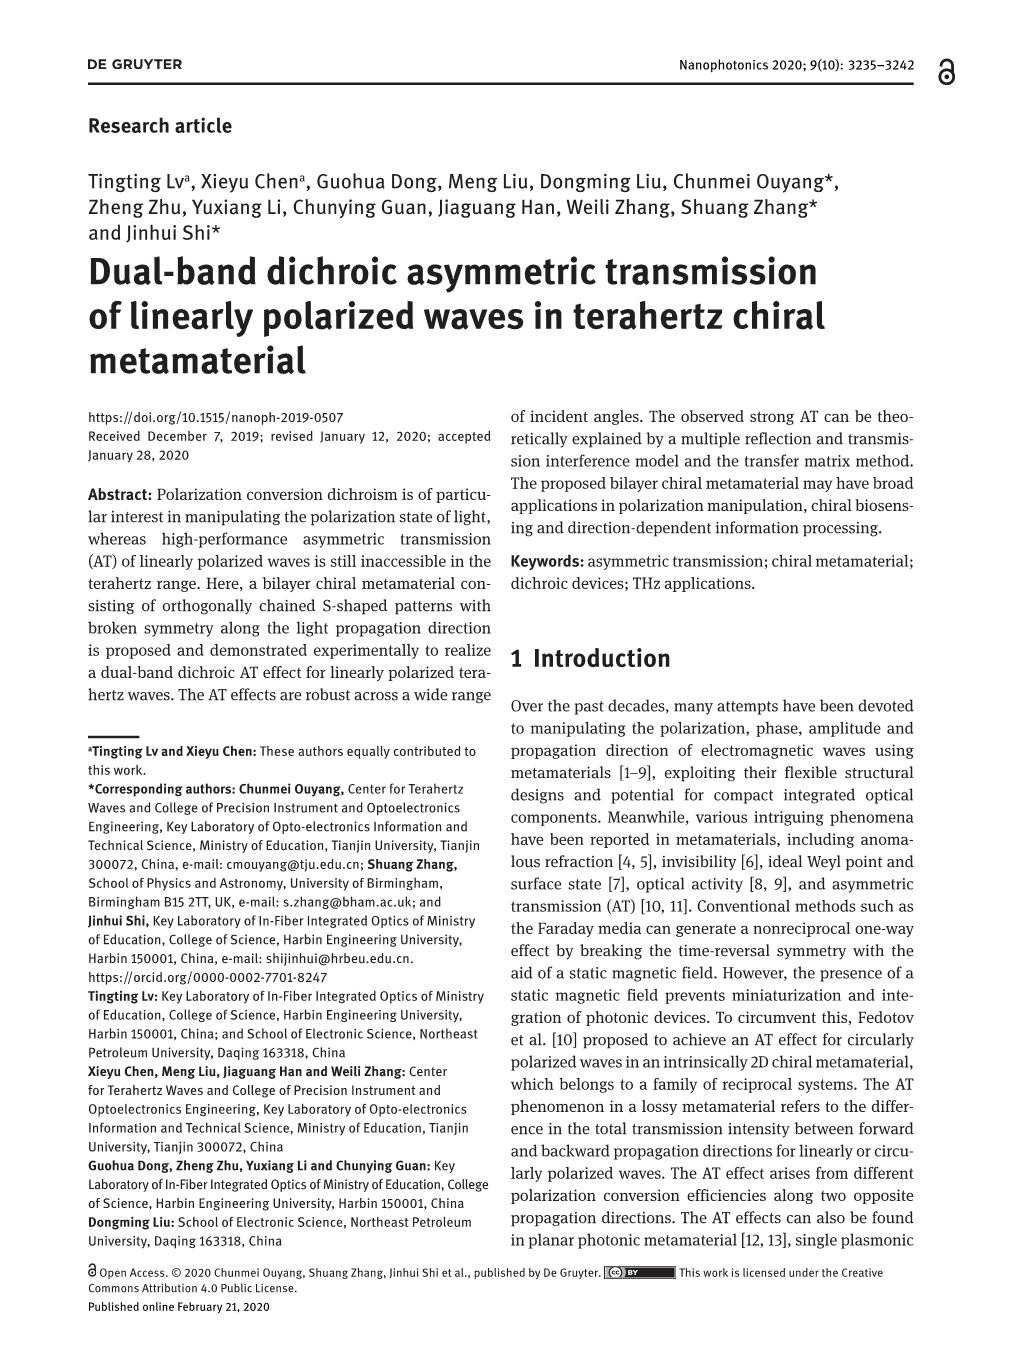 Dual-Band Dichroic Asymmetric Transmission of Linearly Polarized Waves in Terahertz Chiral Metamaterial of Incident Angles